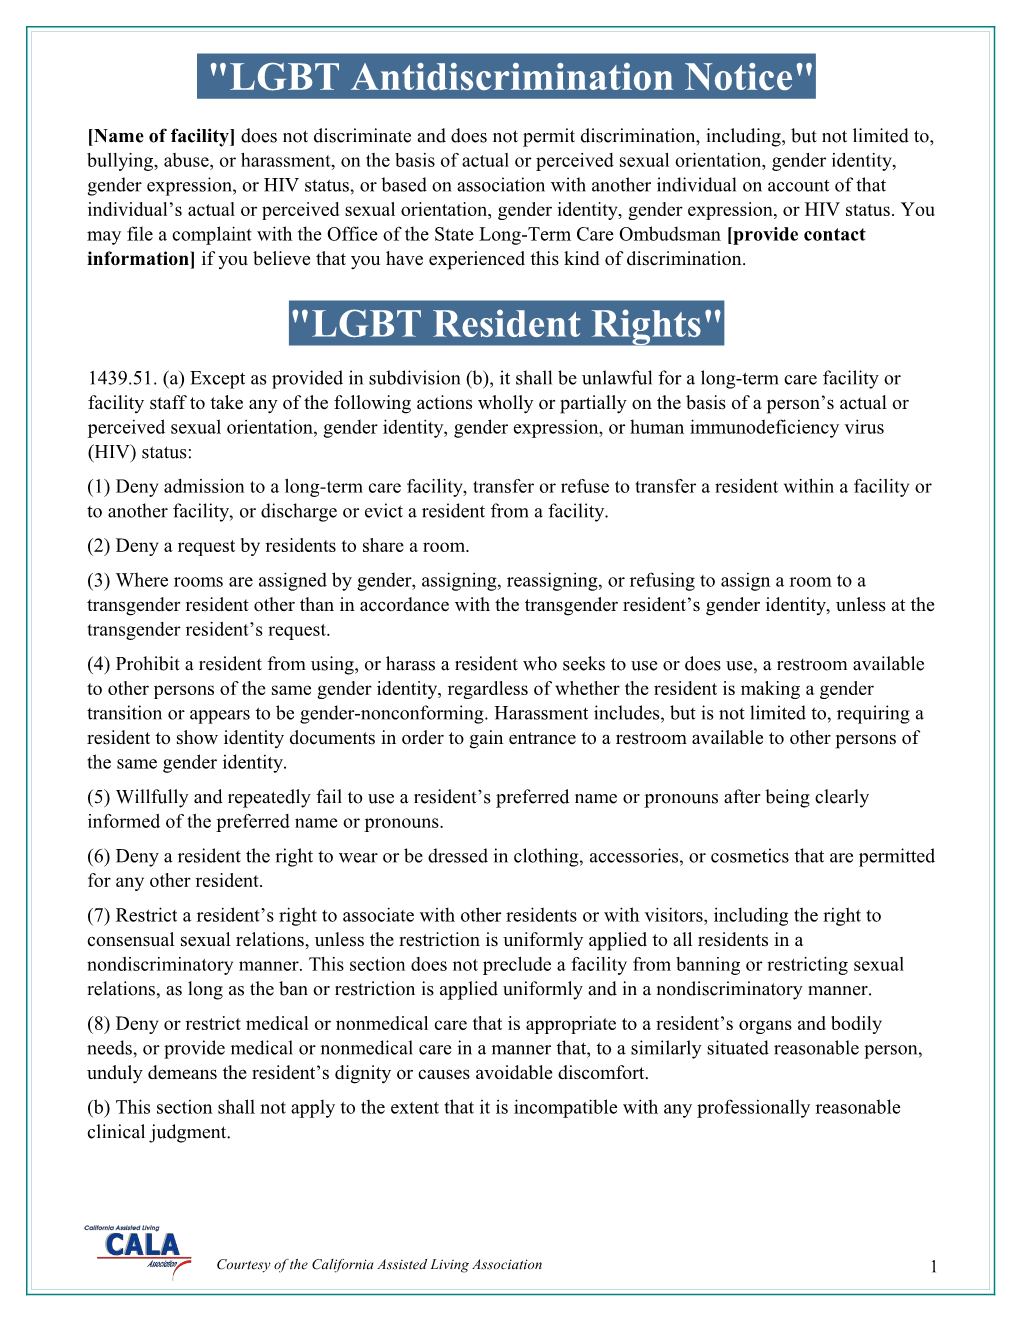 LGBT Resident Rights